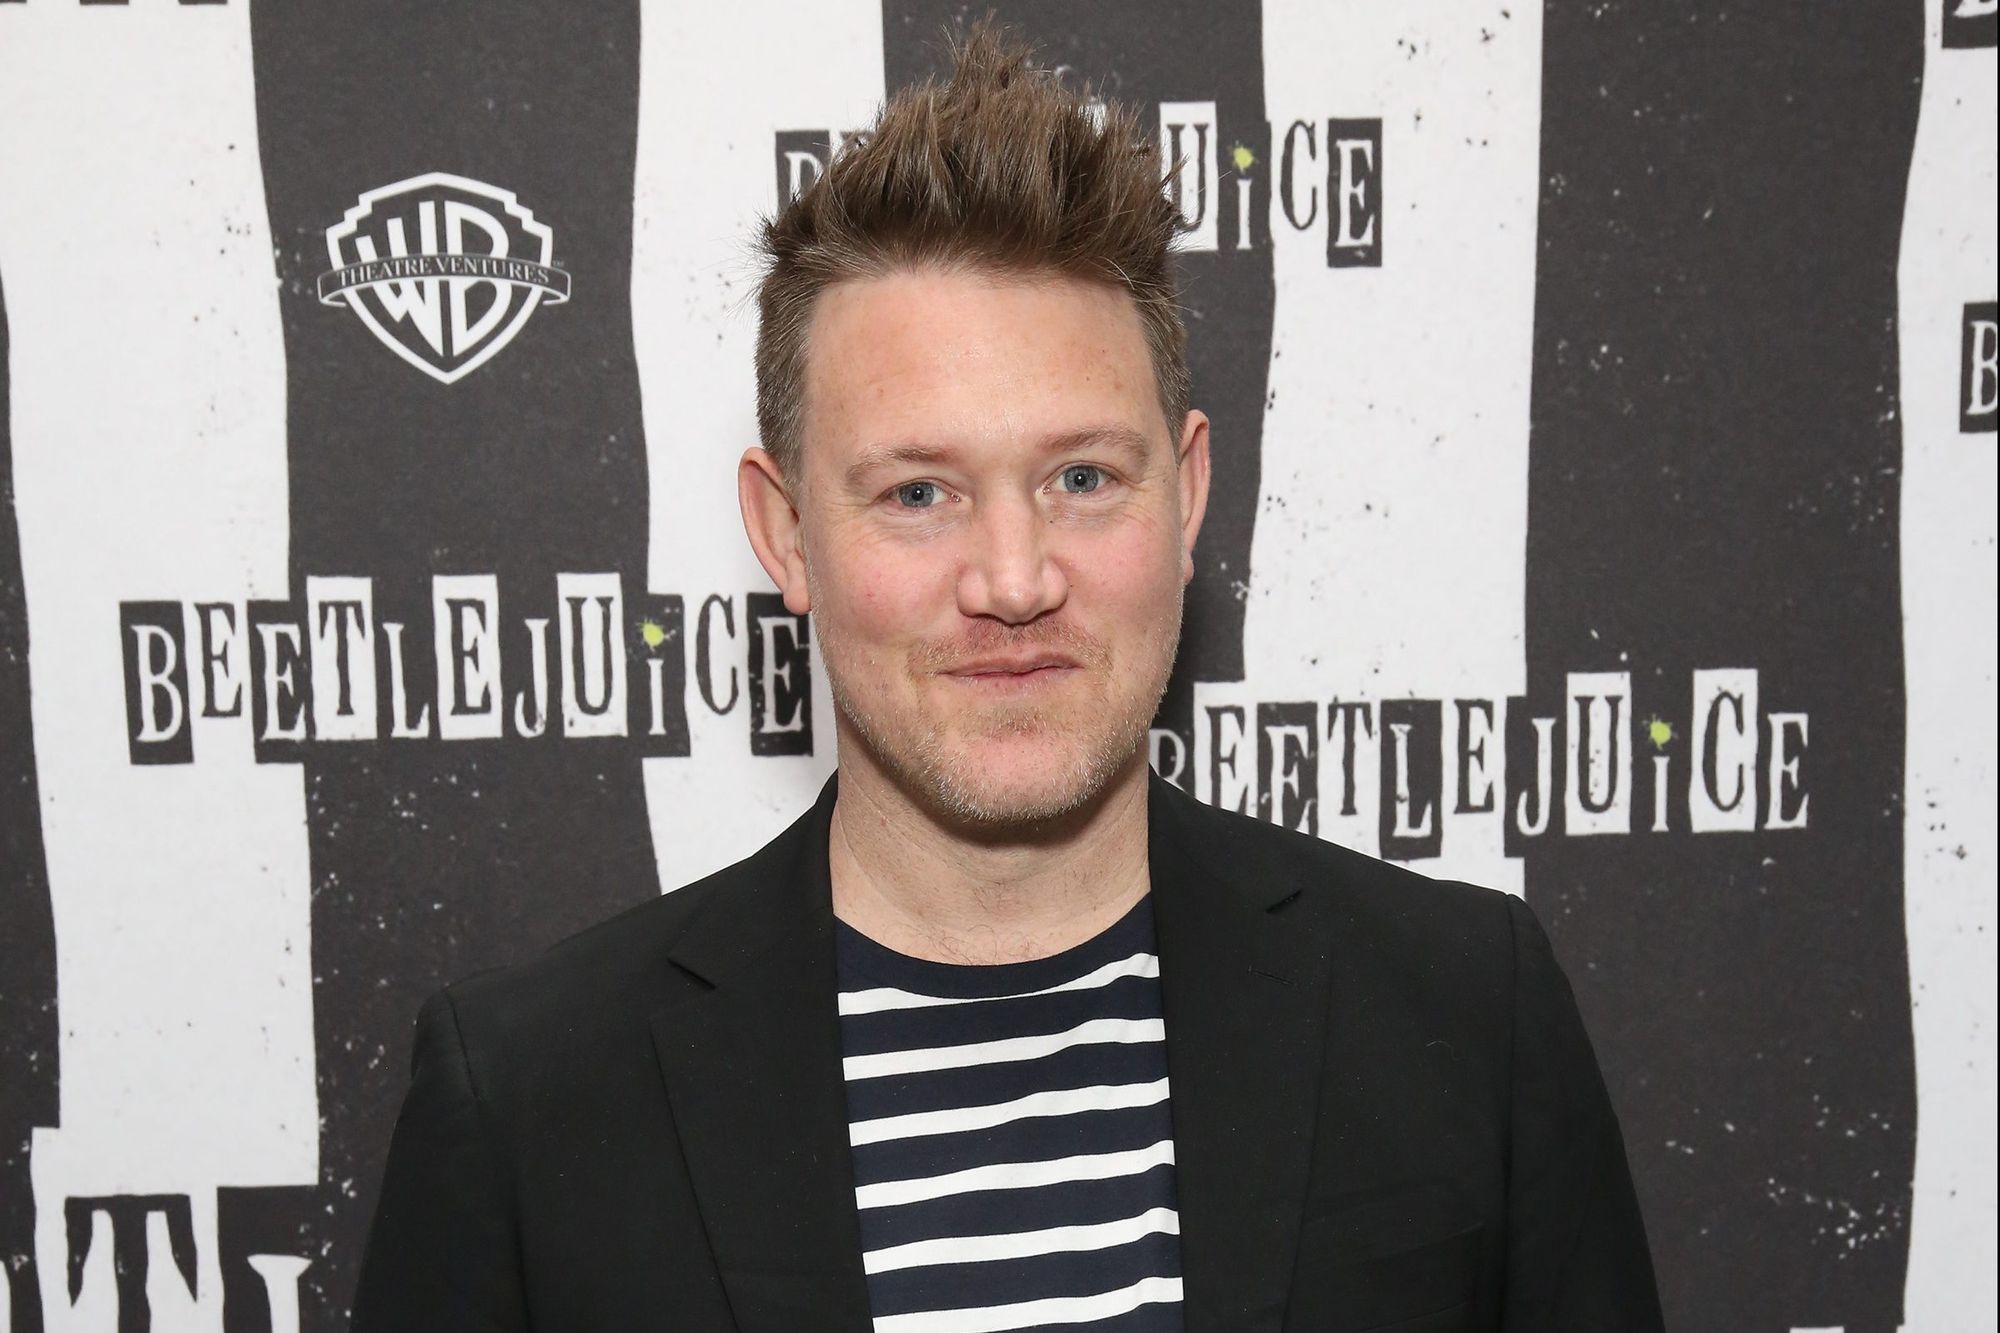 How 'Beetlejuice' composer Eddie Perfect booked two Broadway